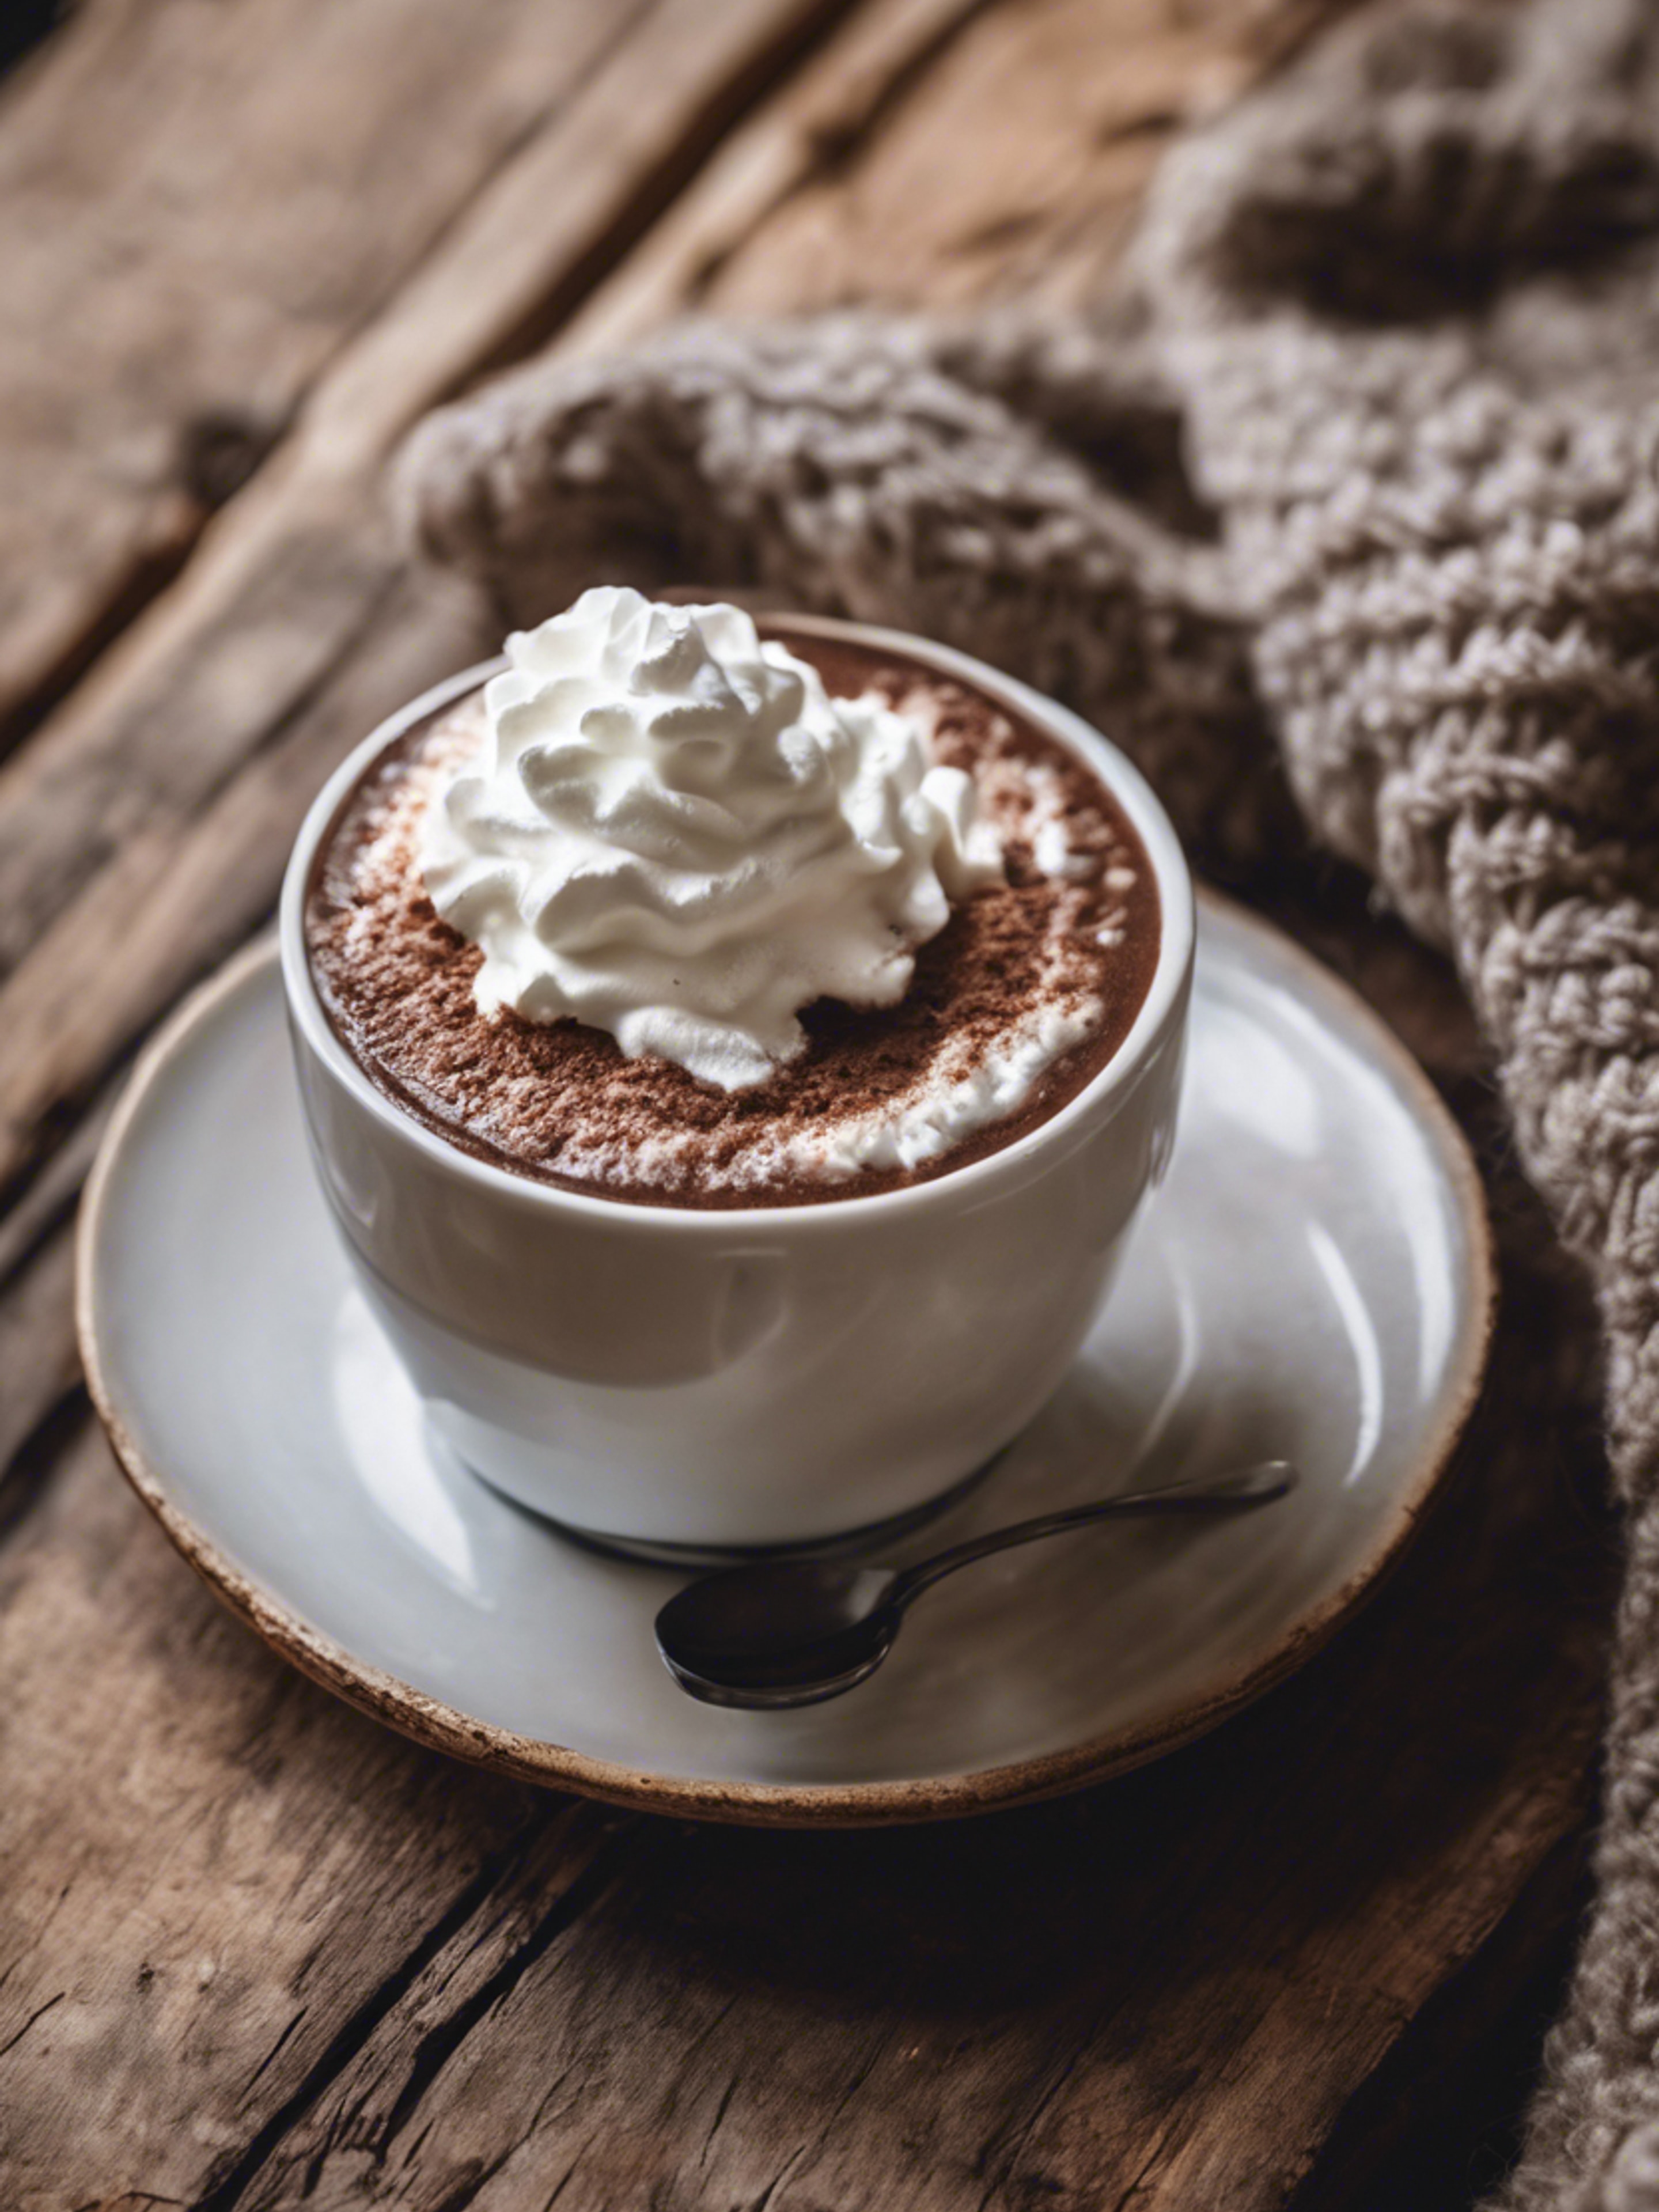 A porcelain cup of steaming hot chocolate topped with whipped cream, next to a crochet coaster on a rough wooden table. Fondo de pantalla[f8ececc79cde48c88690]